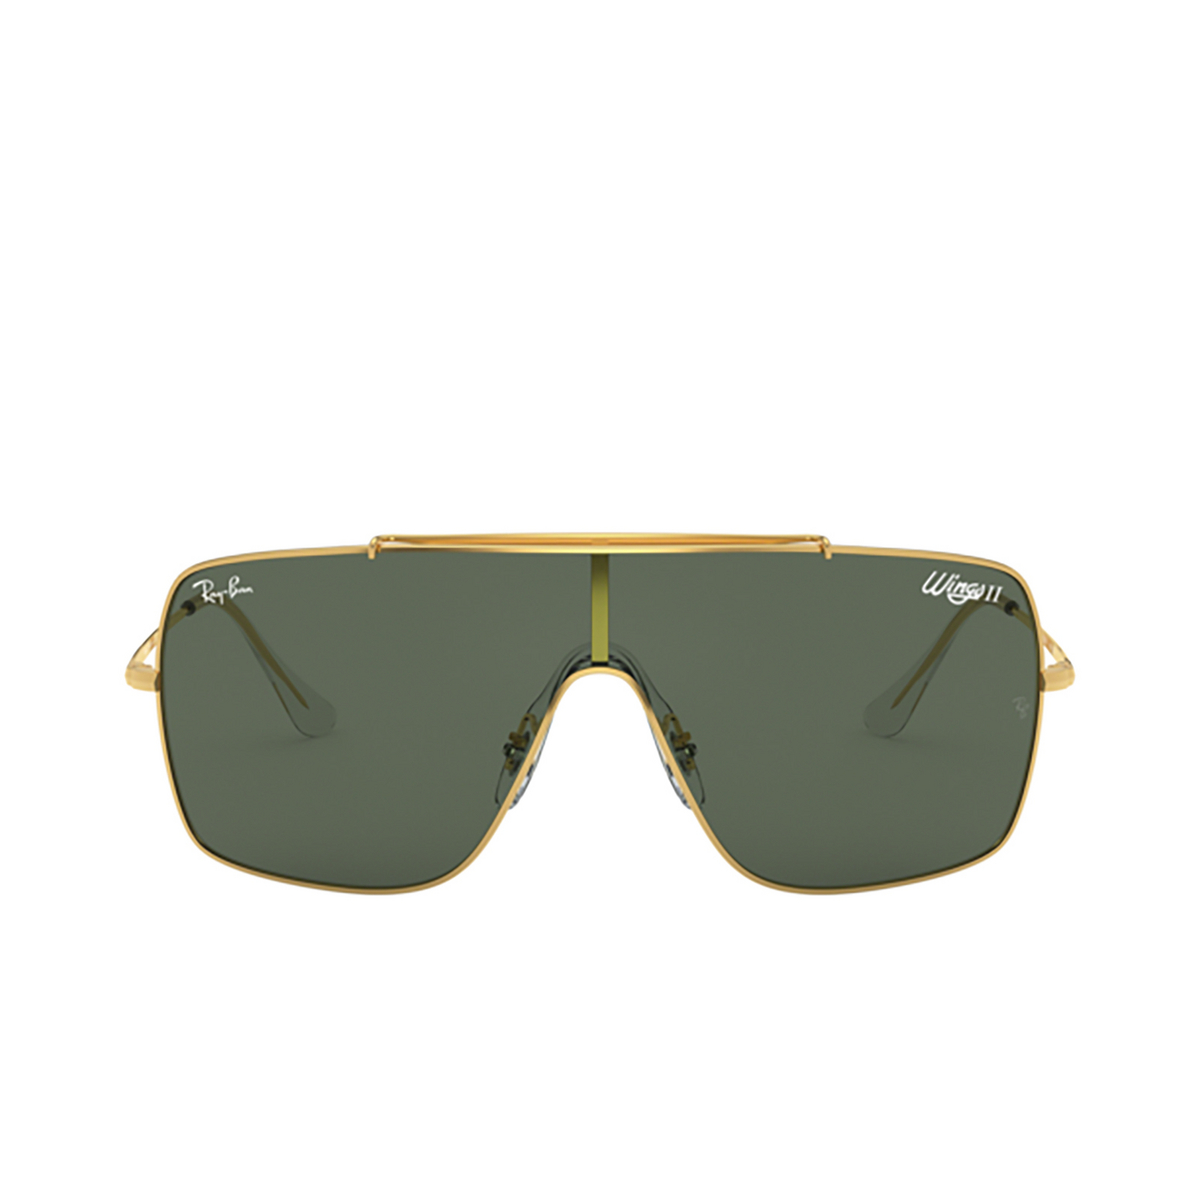 Ray-Ban WINGS II Sunglasses 905071 GOLD - front view